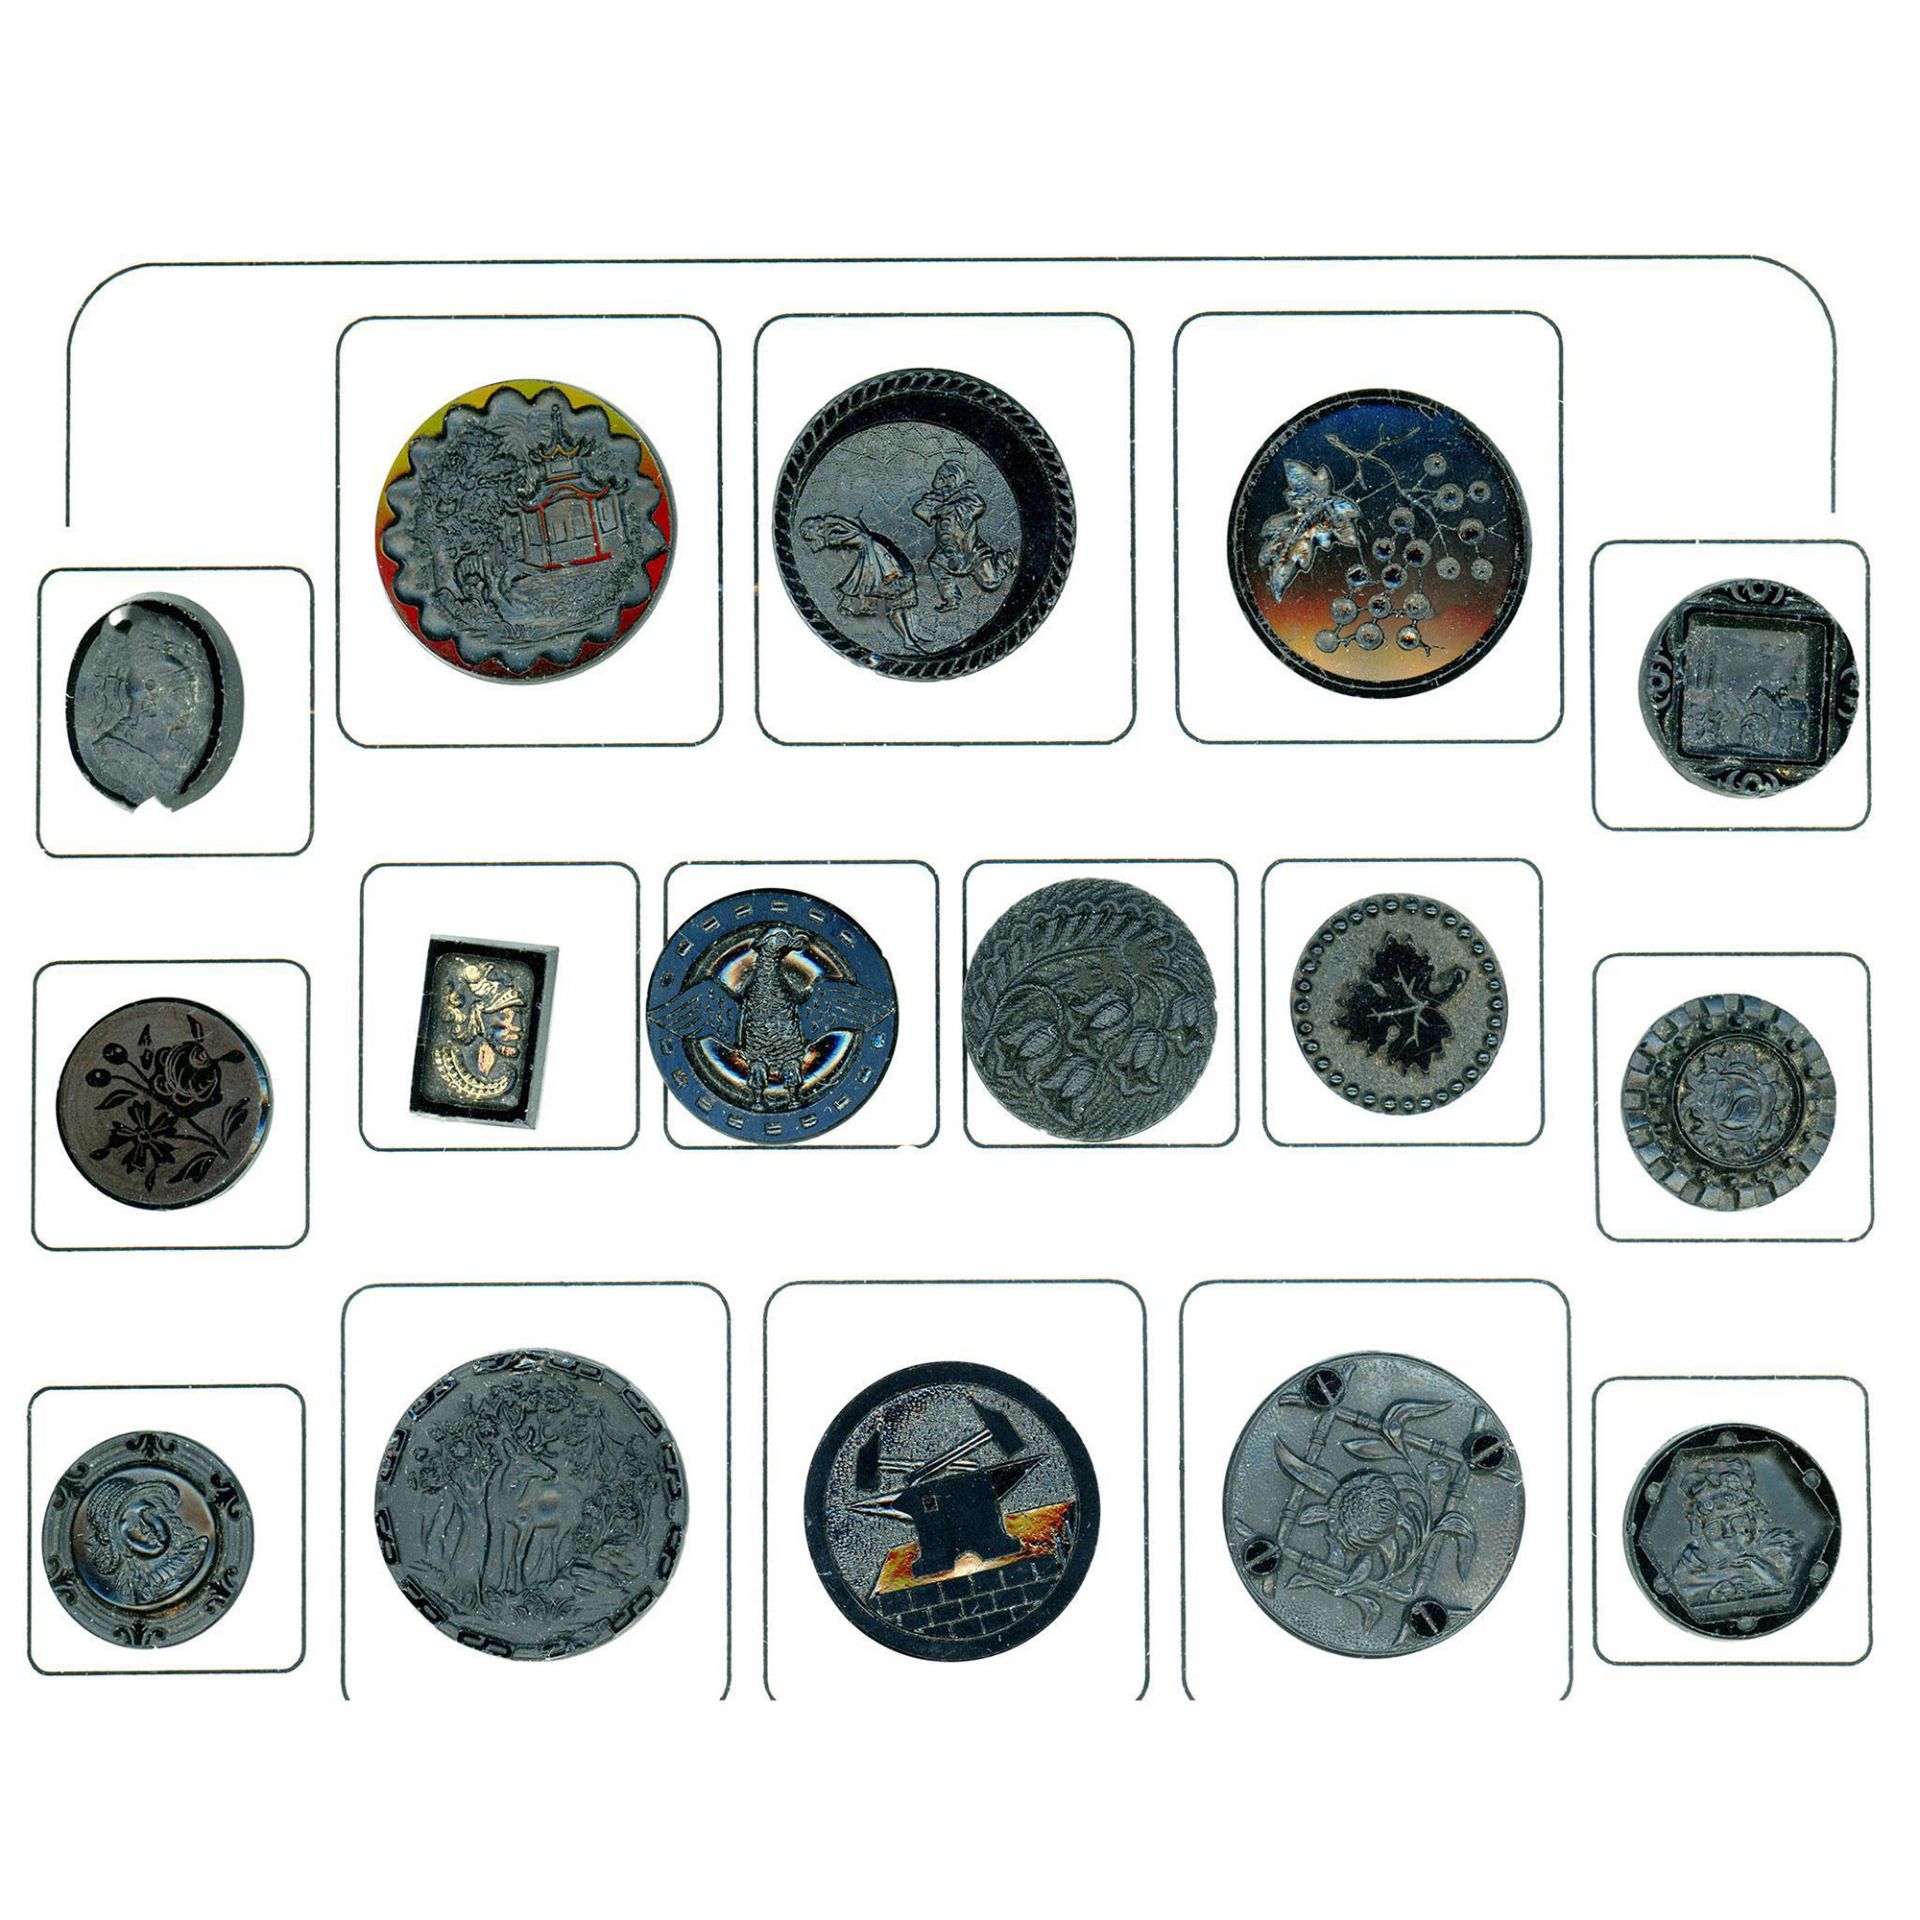 A partial card of division one black glass buttons